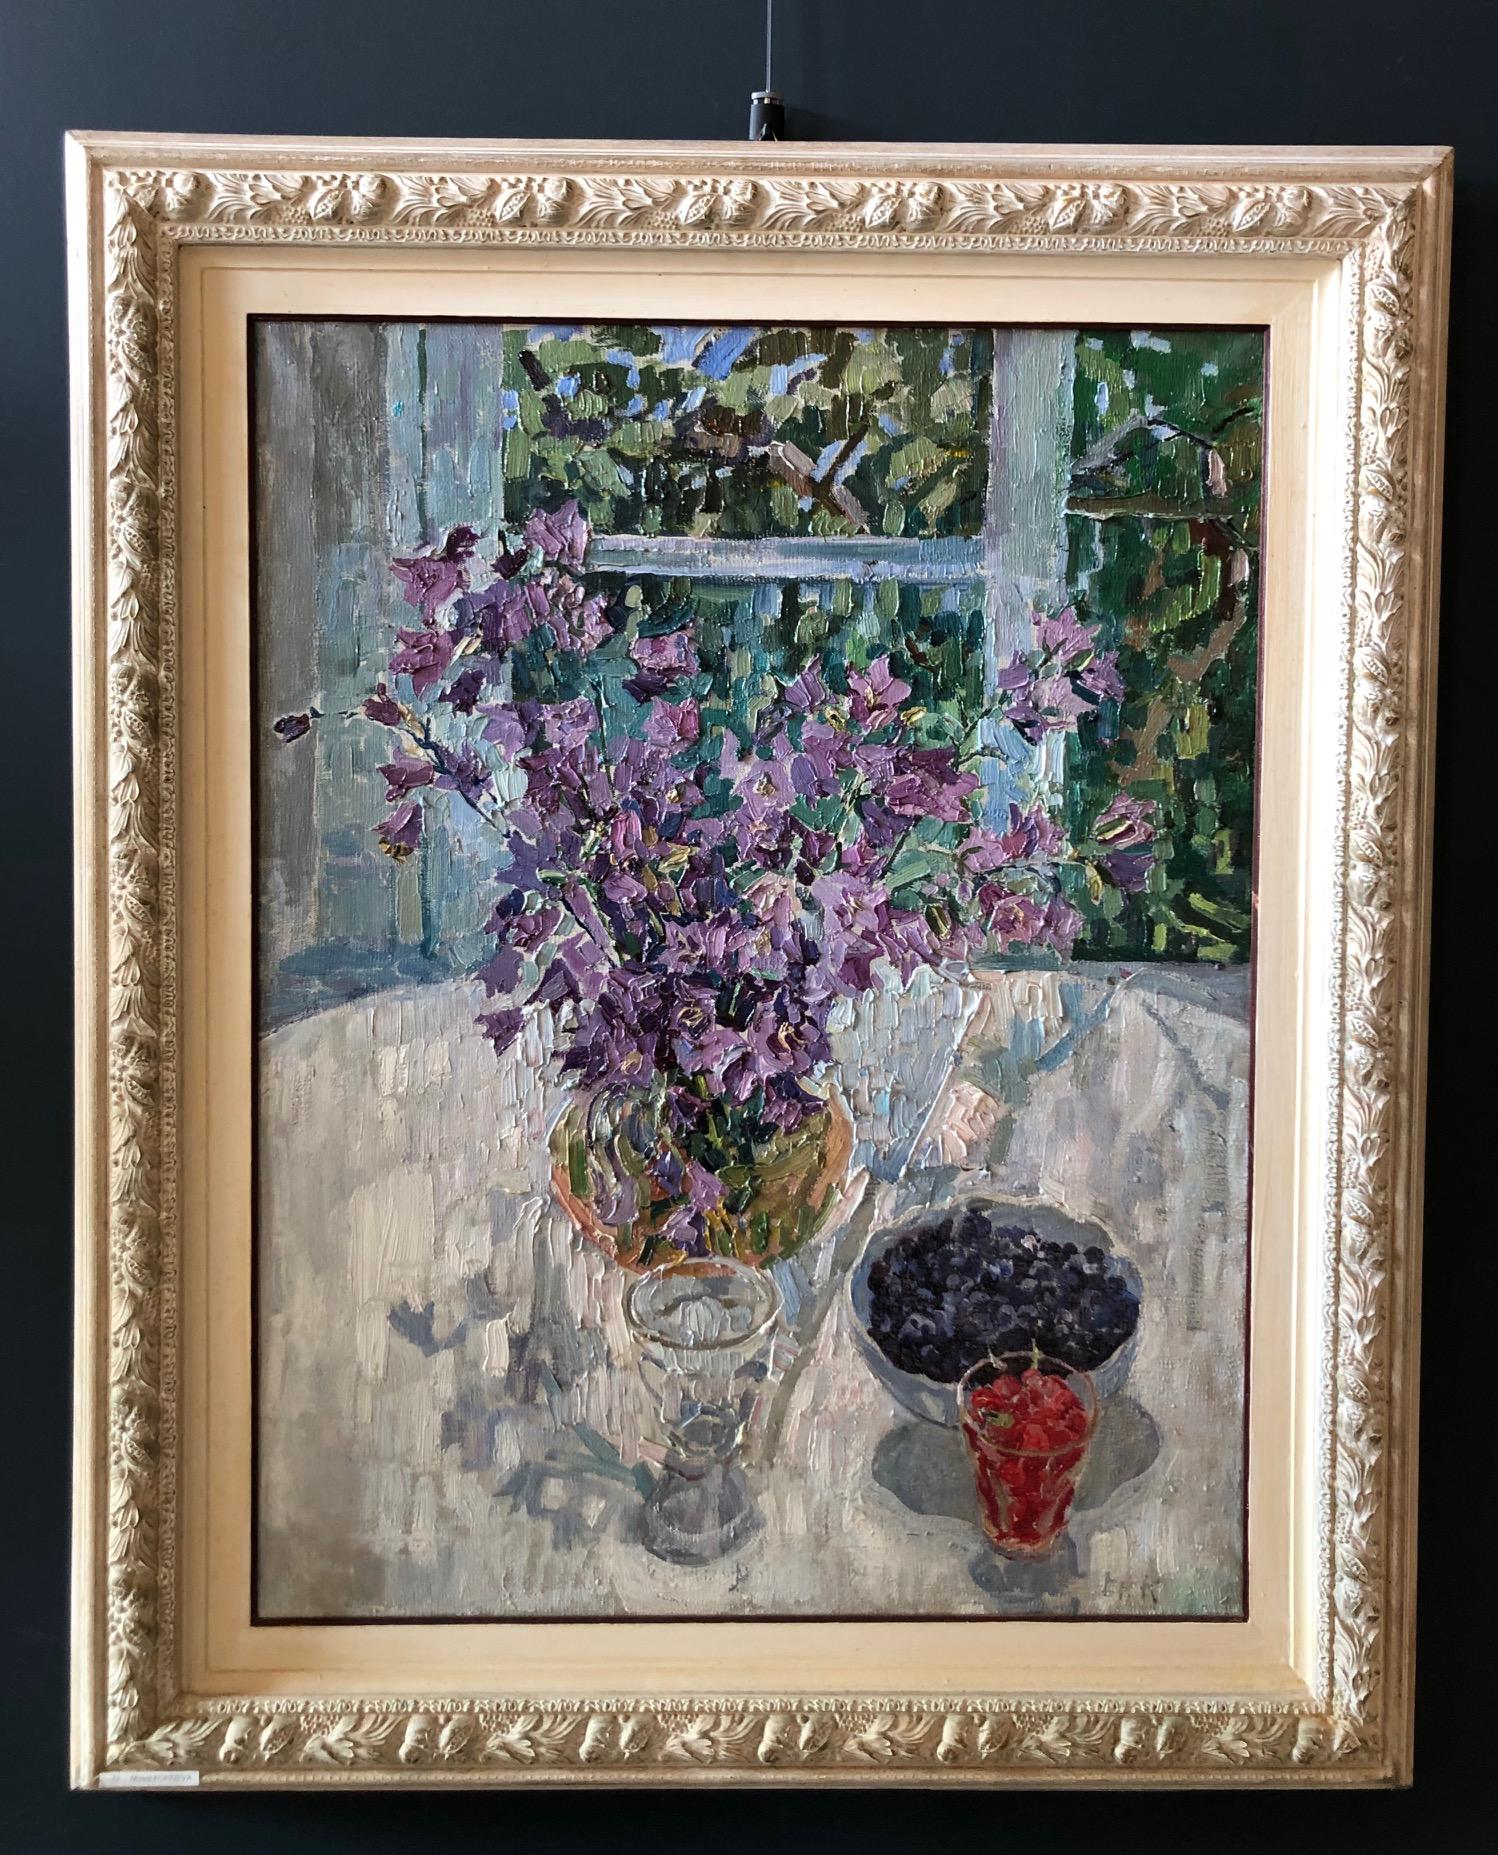 Purple bellflowers, berries, window , Violet,  Flowers,Russian Impressionism

MAYA KOPITZEVA    (Gagra, Georgia, 1924 - 2005)

Maya kopitzeva’s works have been acquired by the Russian Ministry of Culture, by the Foundation for the Russian Culture,